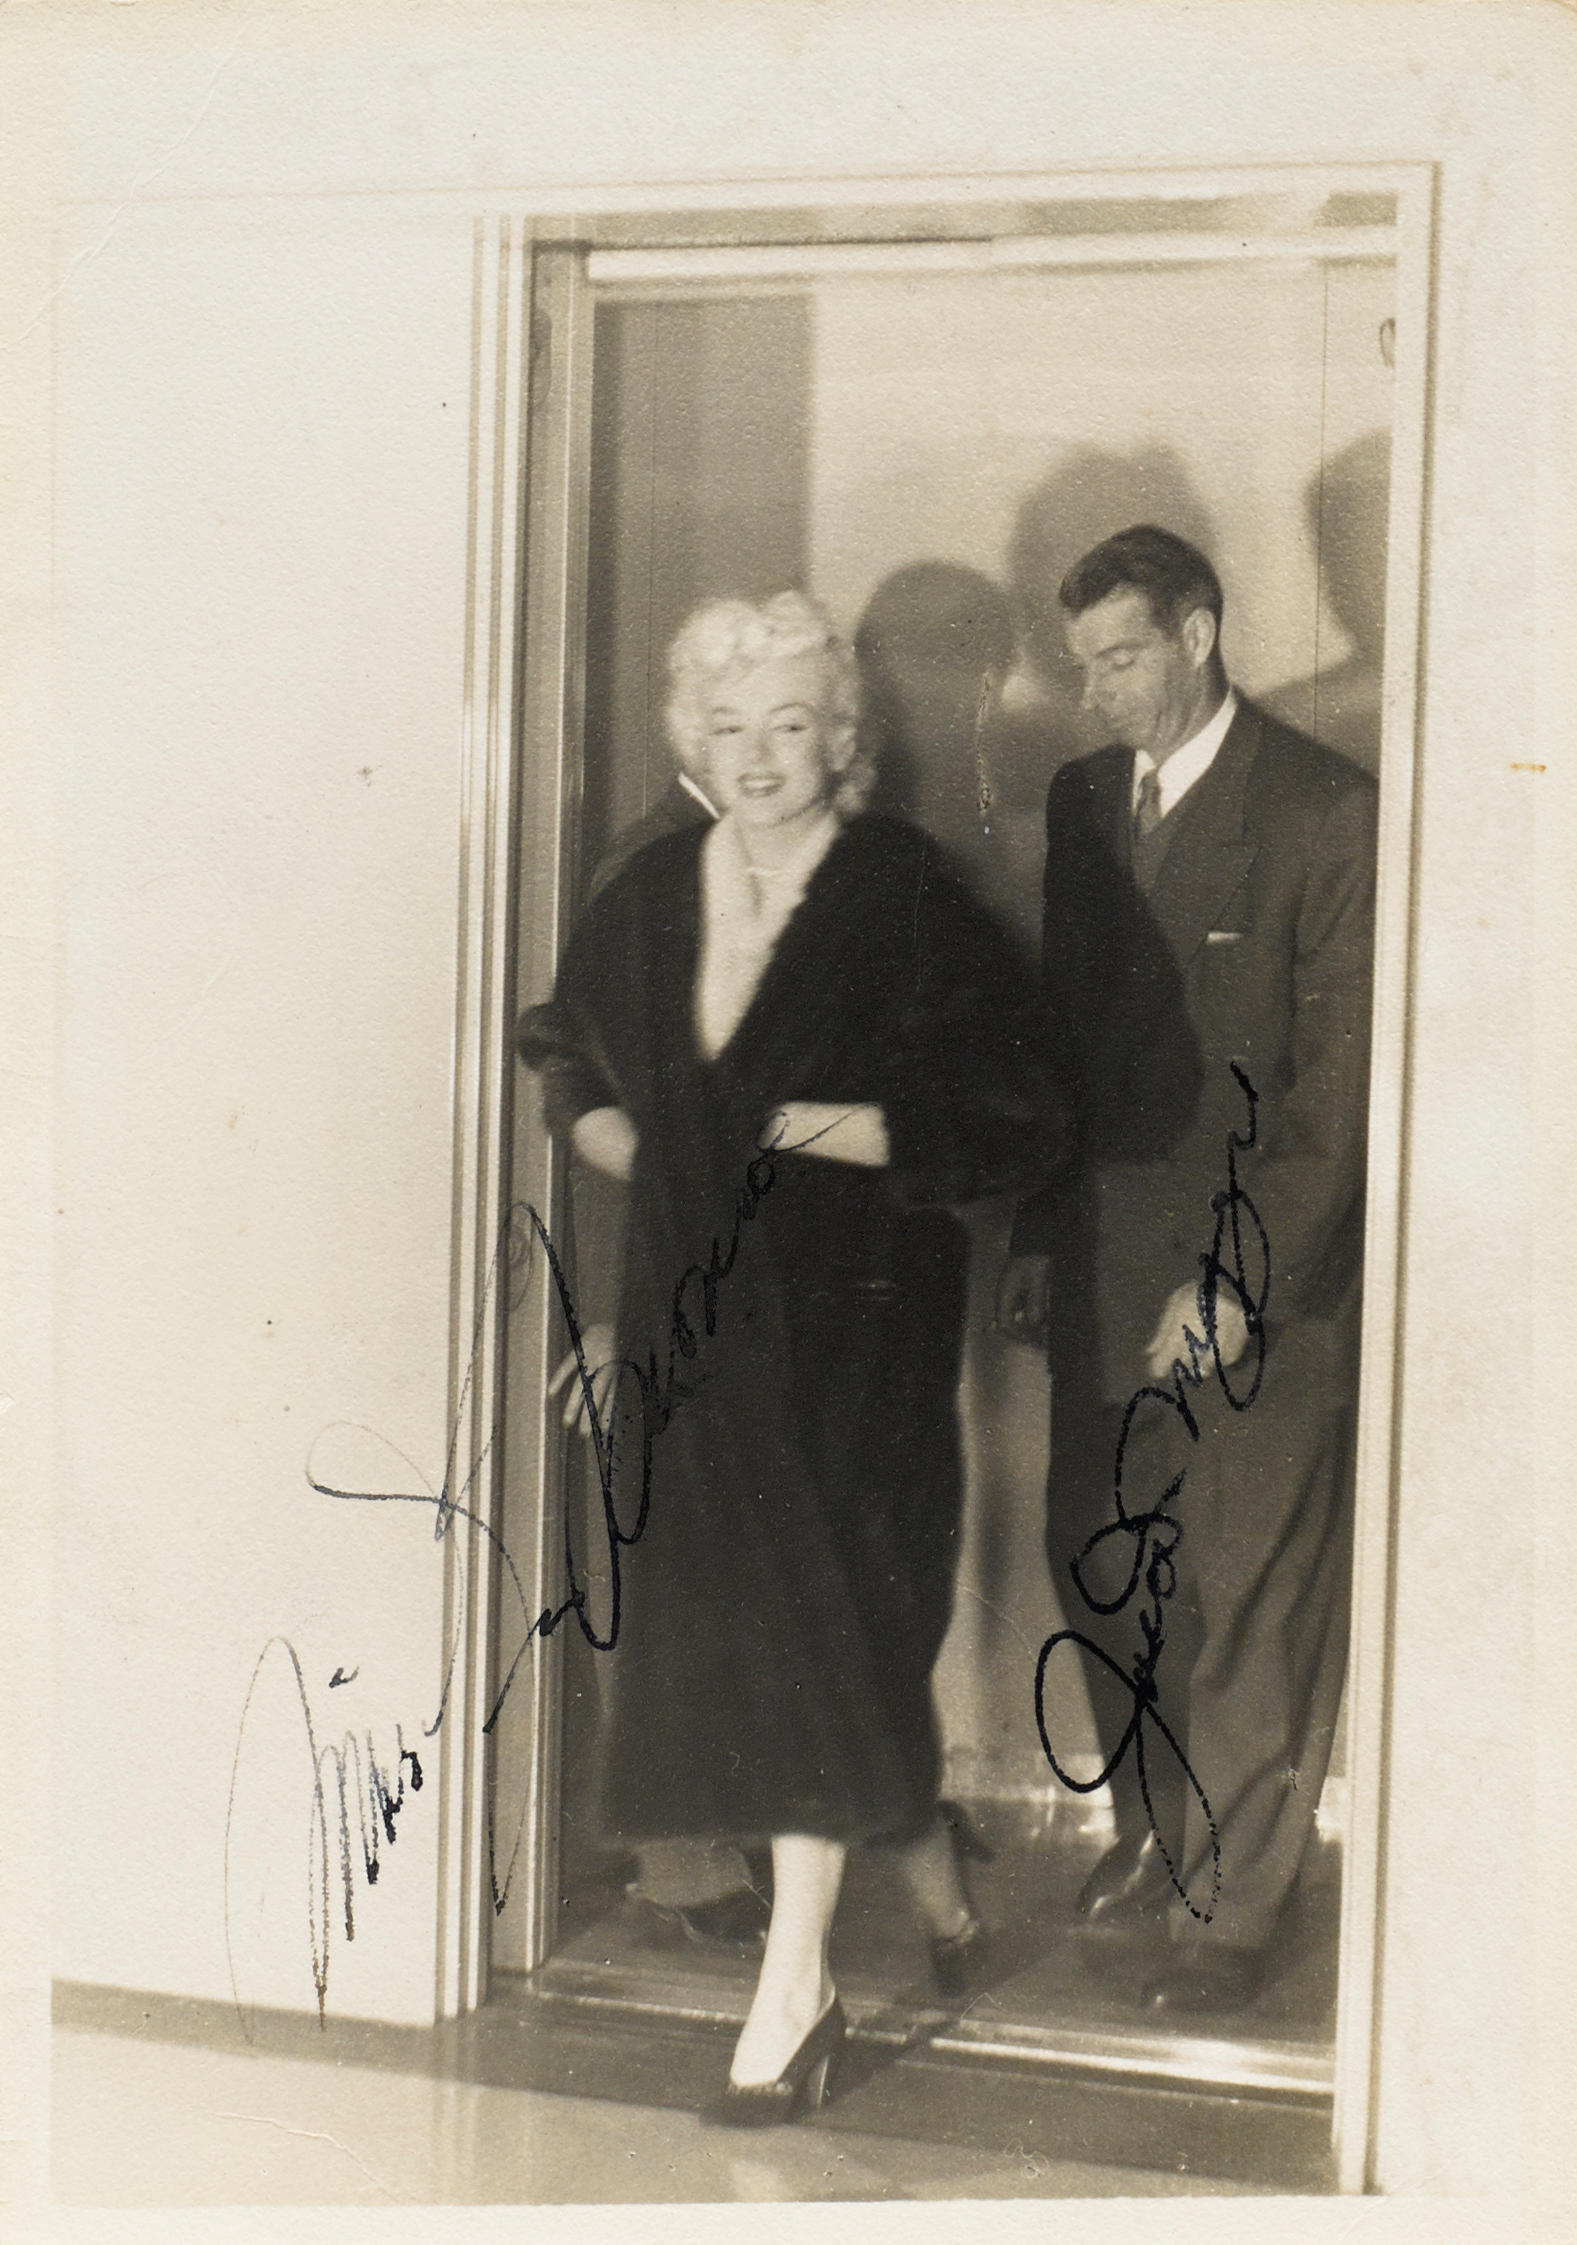 A signed photograph of Marilyn Monroe and Joe DiMaggio - auctions ...